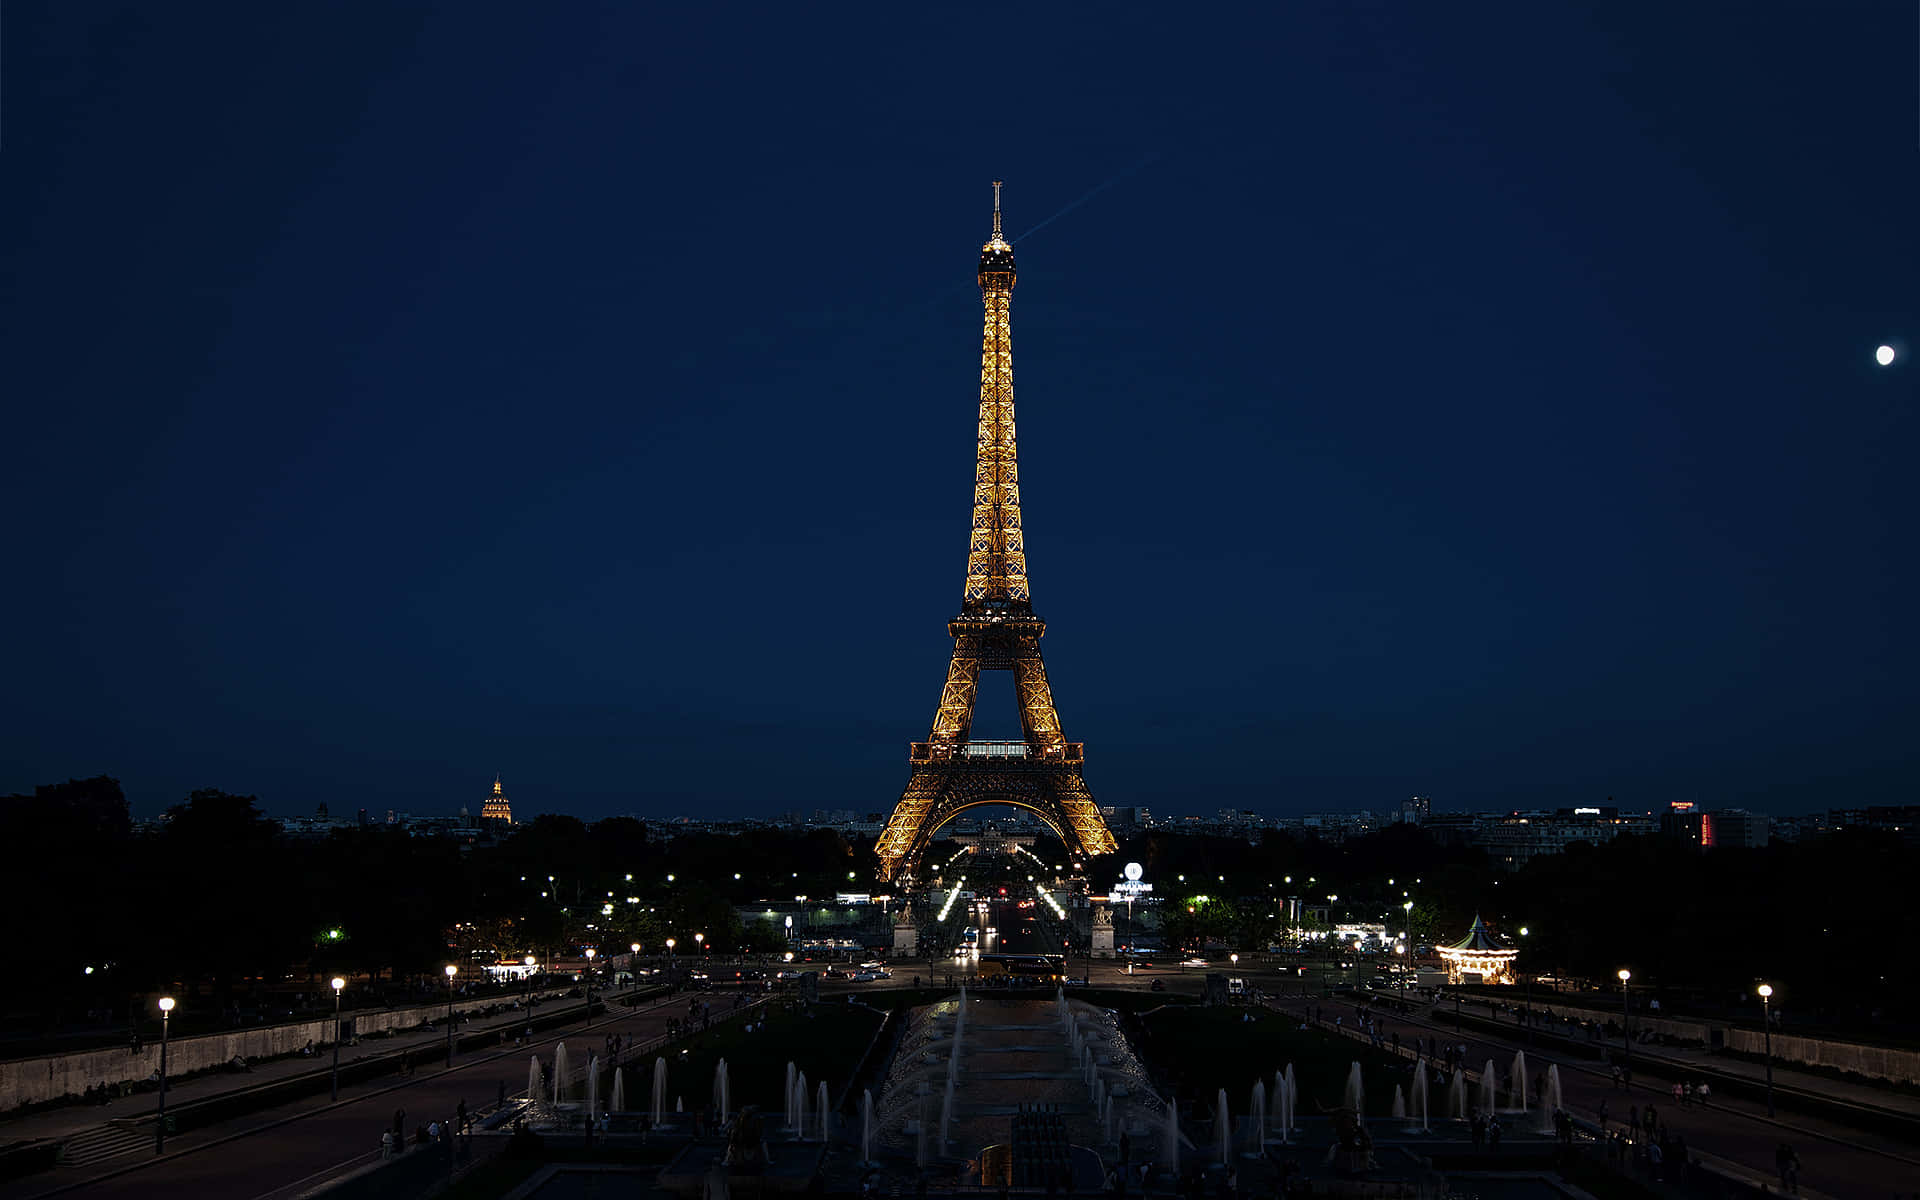 The Eiffel Tower at night lights up the sky with a golden glow.